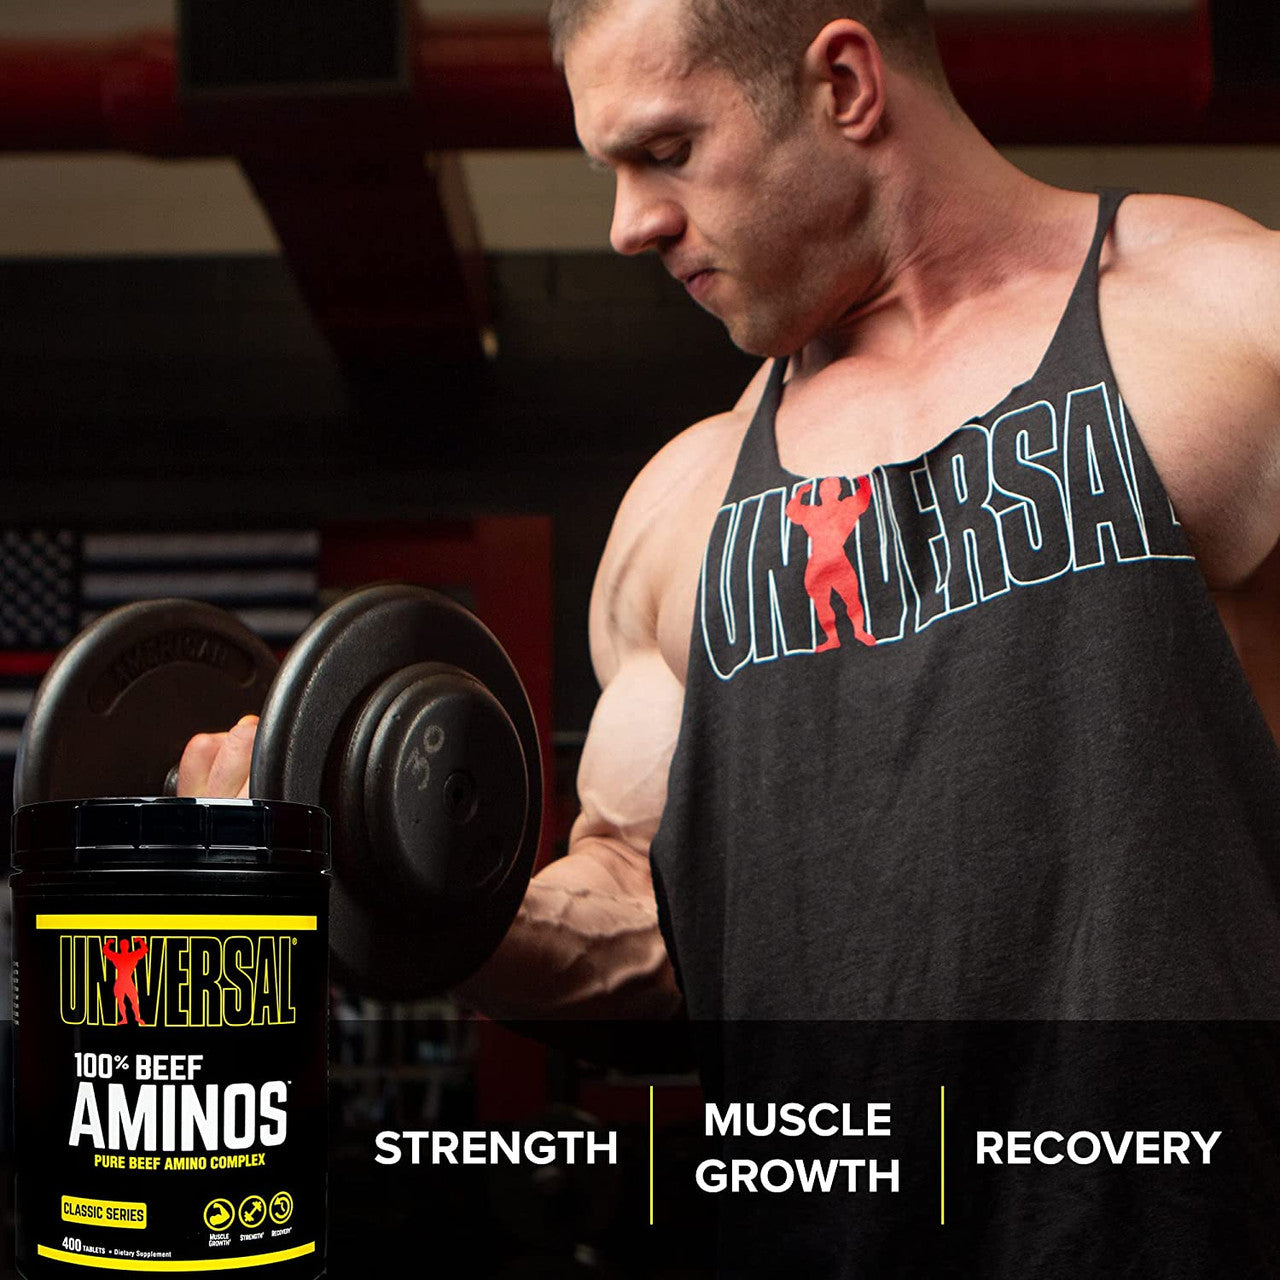 Universal Nutrition 100% Beef Aminos Product Highlights Man Working Out